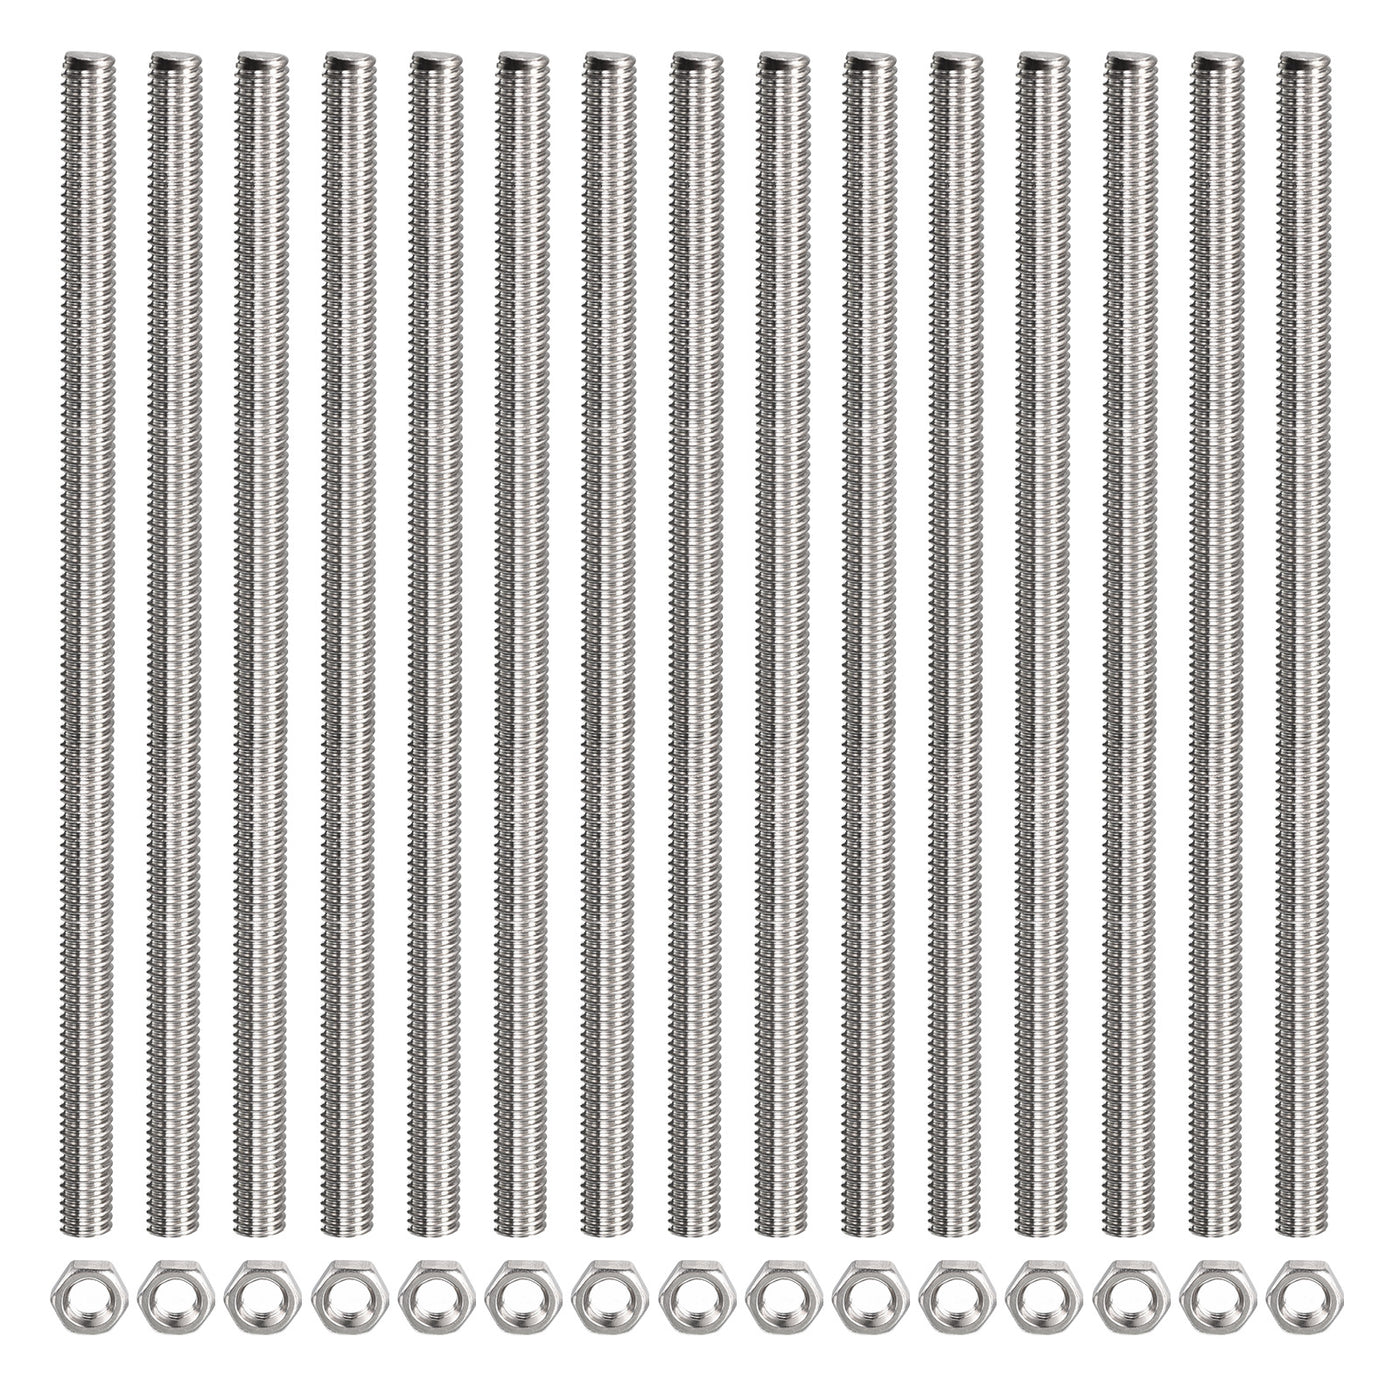 Harfington 15Pack M5 x 400mm Fully Threaded Rod W 15Pack Hex Nuts, 0.8mm Thread Pitch